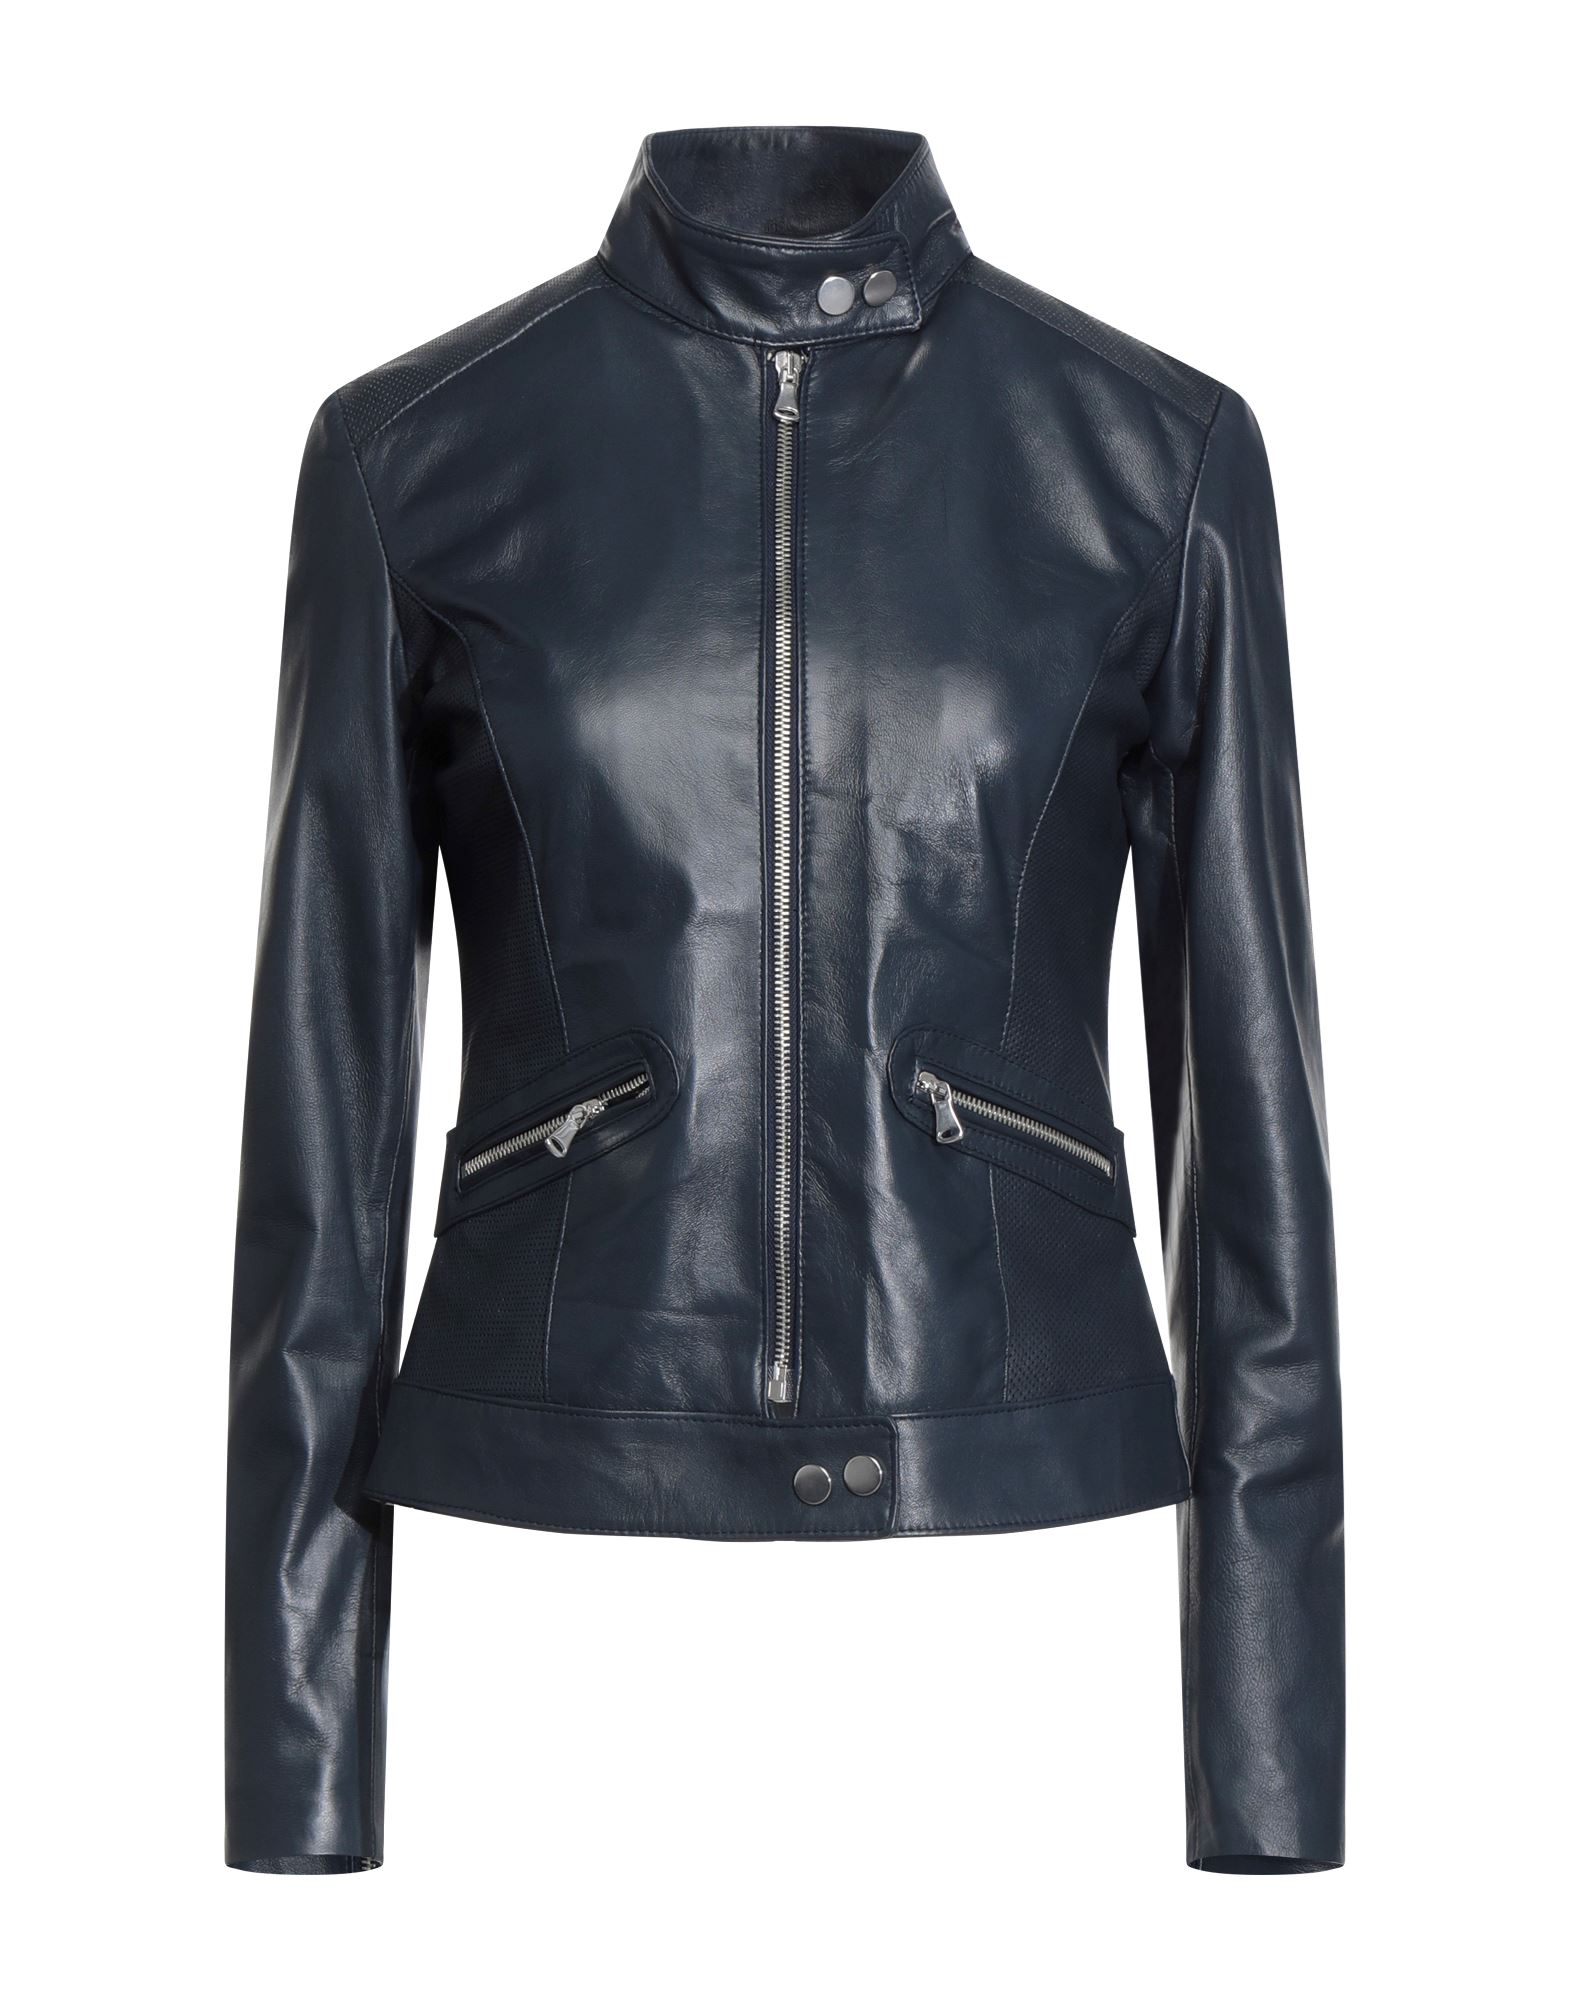 MASTERPELLE MASTERPELLE WOMAN JACKET MIDNIGHT BLUE SIZE 10 SOFT LEATHER,16020112LH 6